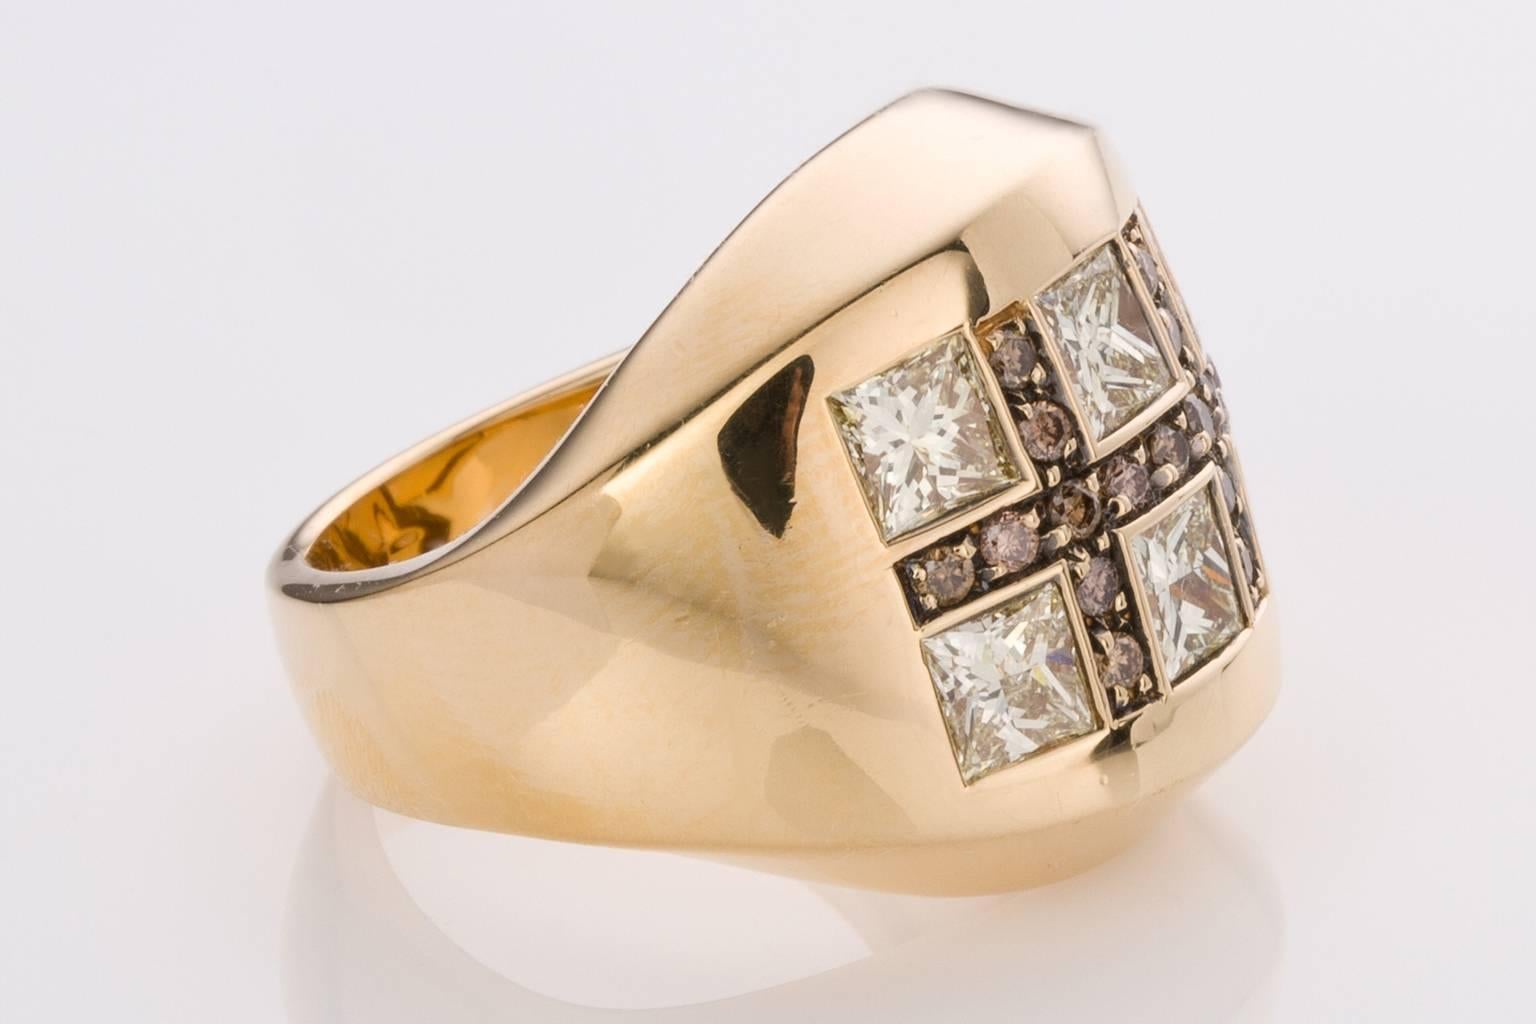 This fabulous Luca Carati dress ring from the 